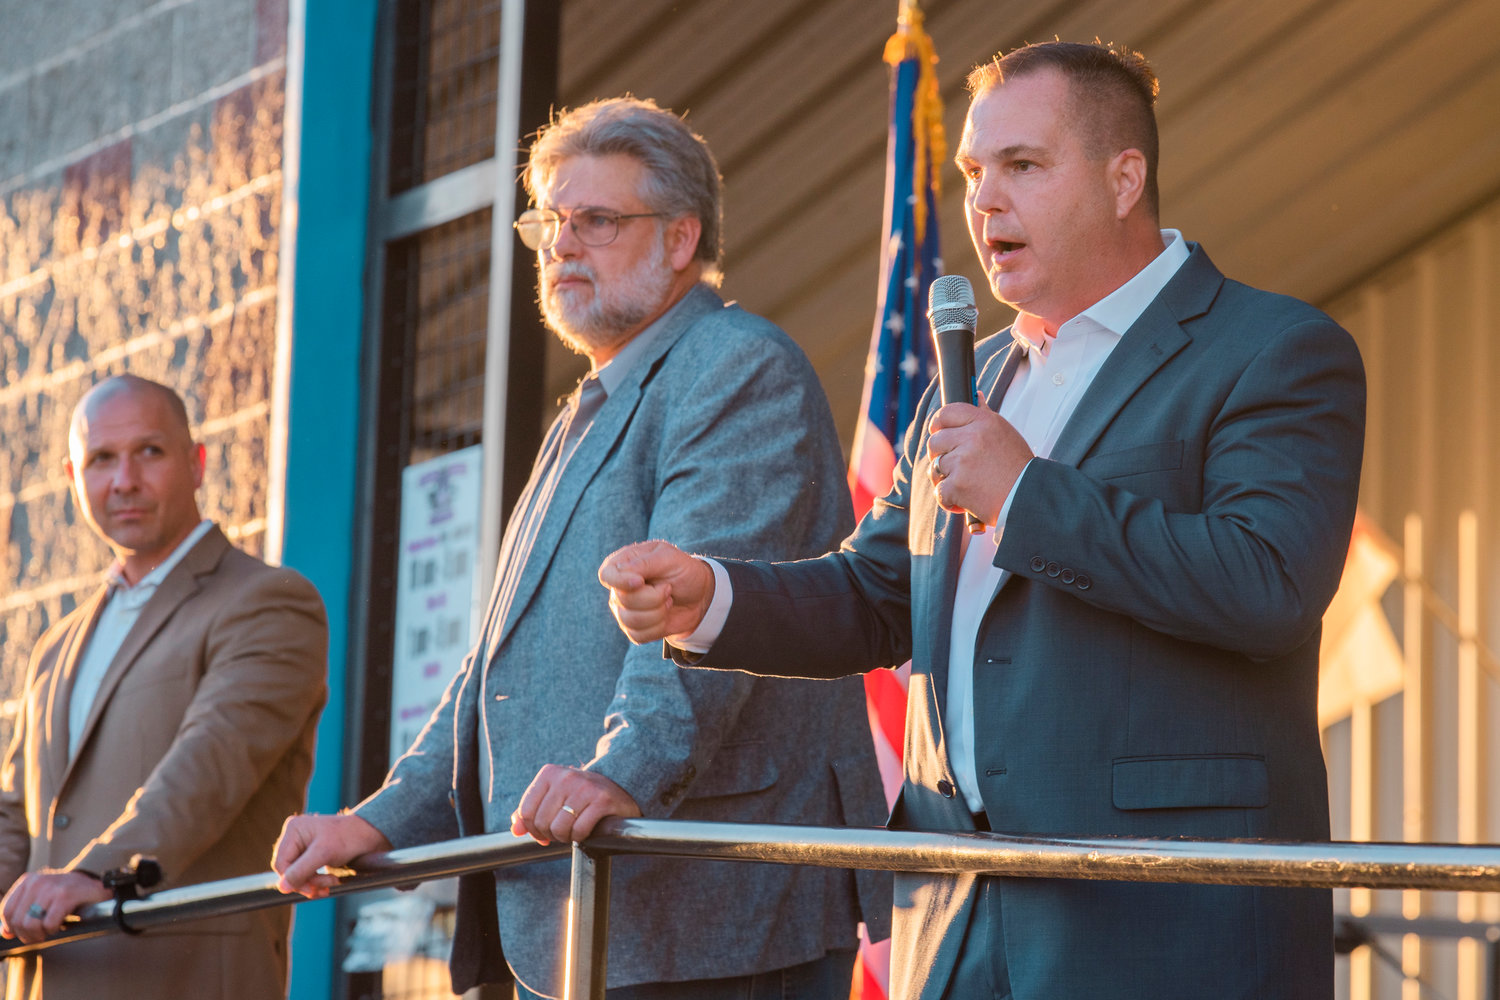 Washington State Senn. John Braun uses a mic to speak to the crowd during a town hall event at the Veterans Memorial Museum alongside alongside state Reps. Peter Abbarno and Ed Orcutt last September in Chehalis.